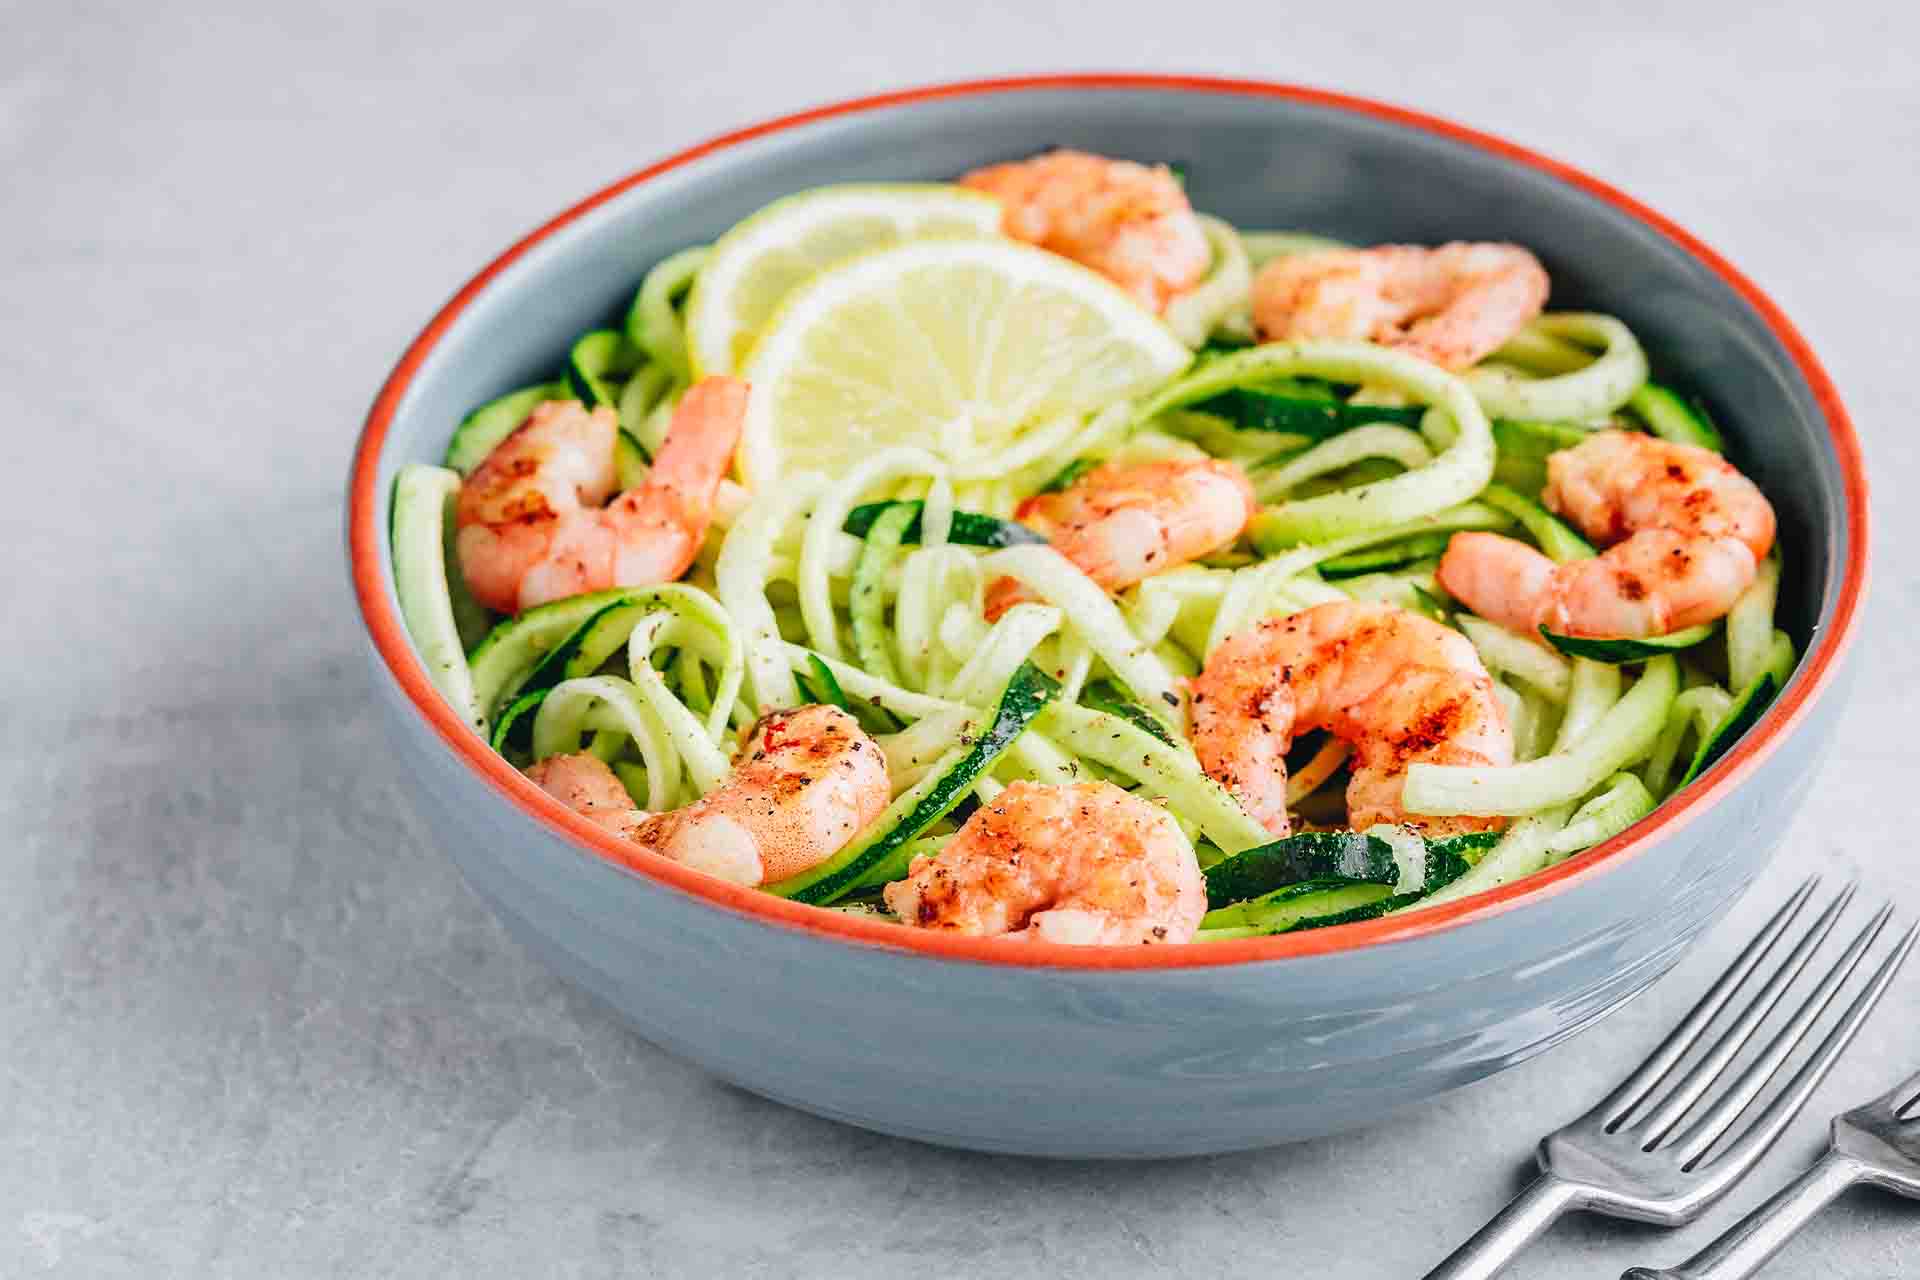 Featured image for “Zucchini Noodles with Avocado Pesto & Shrimp”